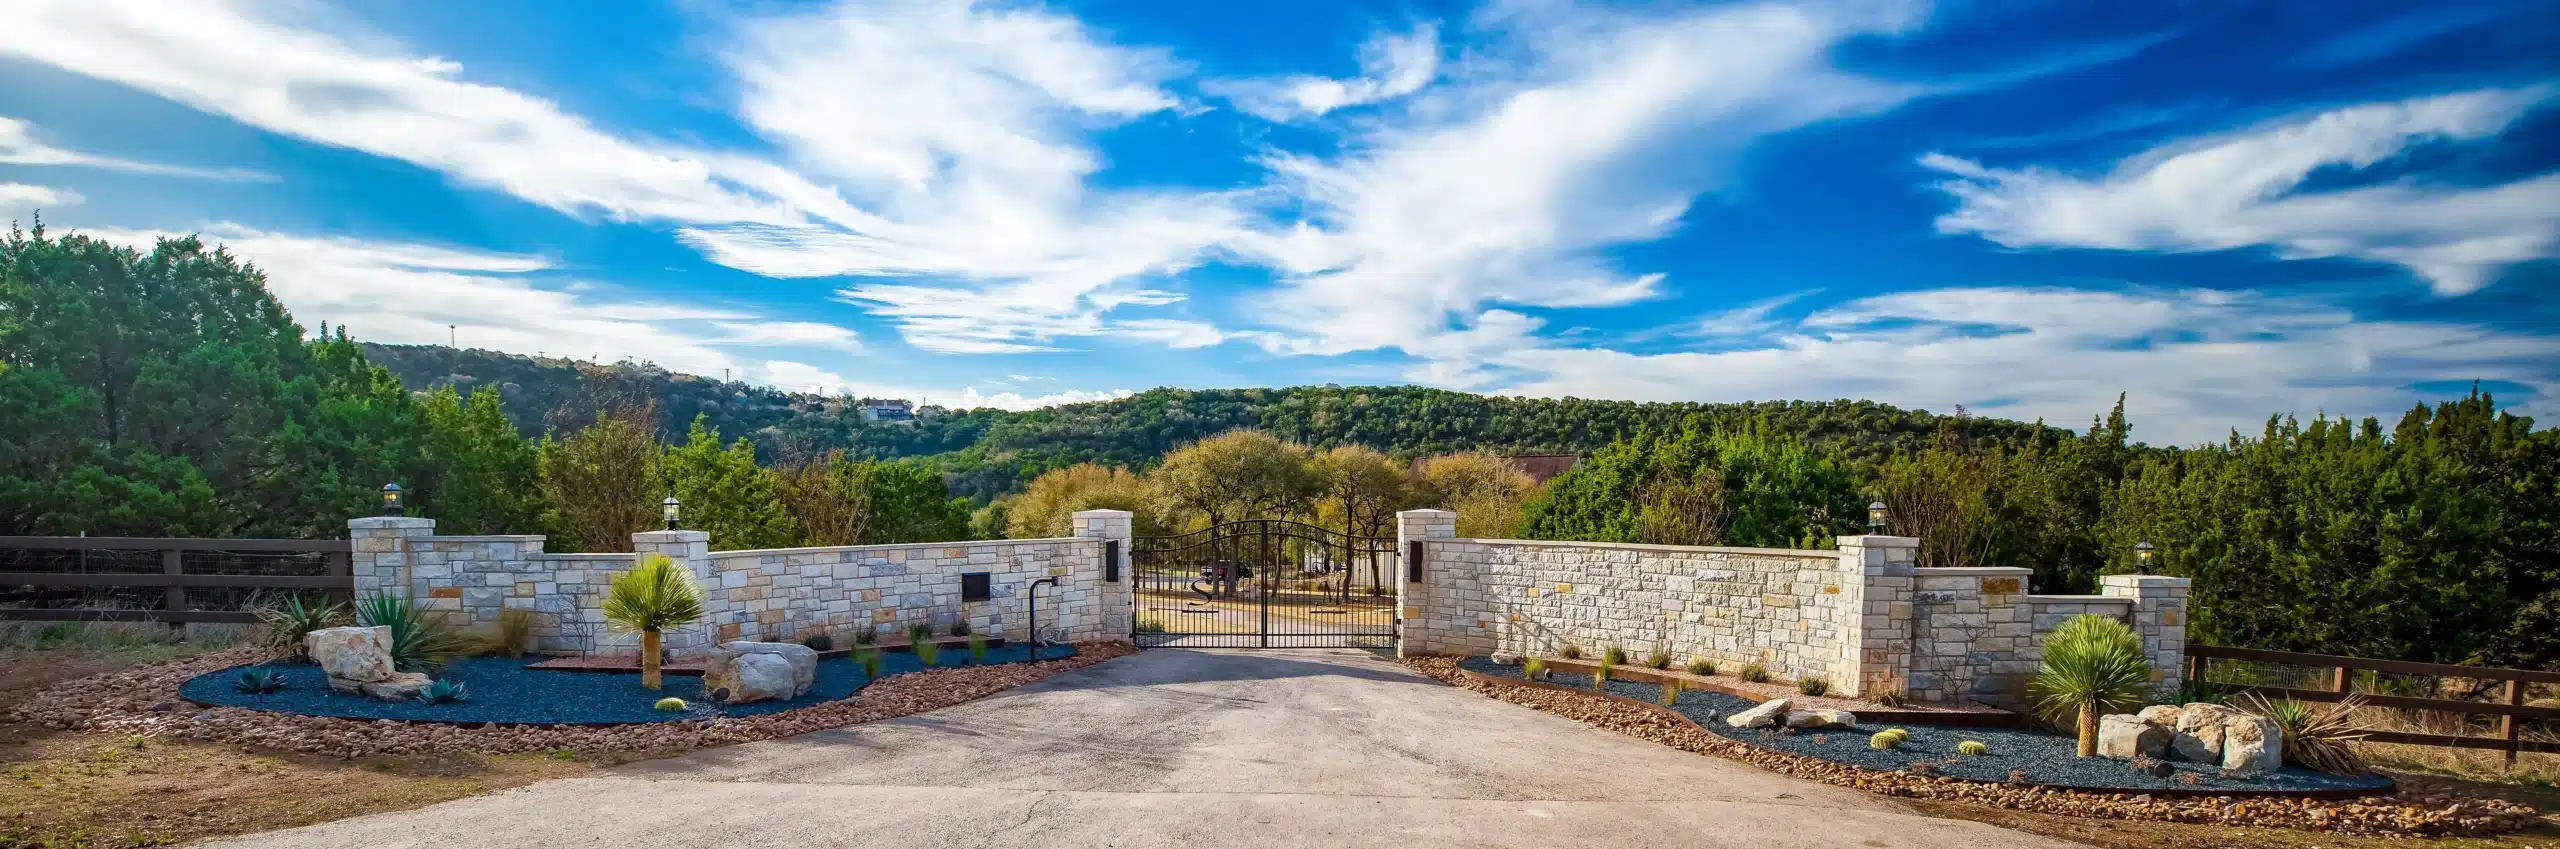 rock wall with gated entry for rural home, lined with rock-filled plant beds, natural rock and Texas-native plants